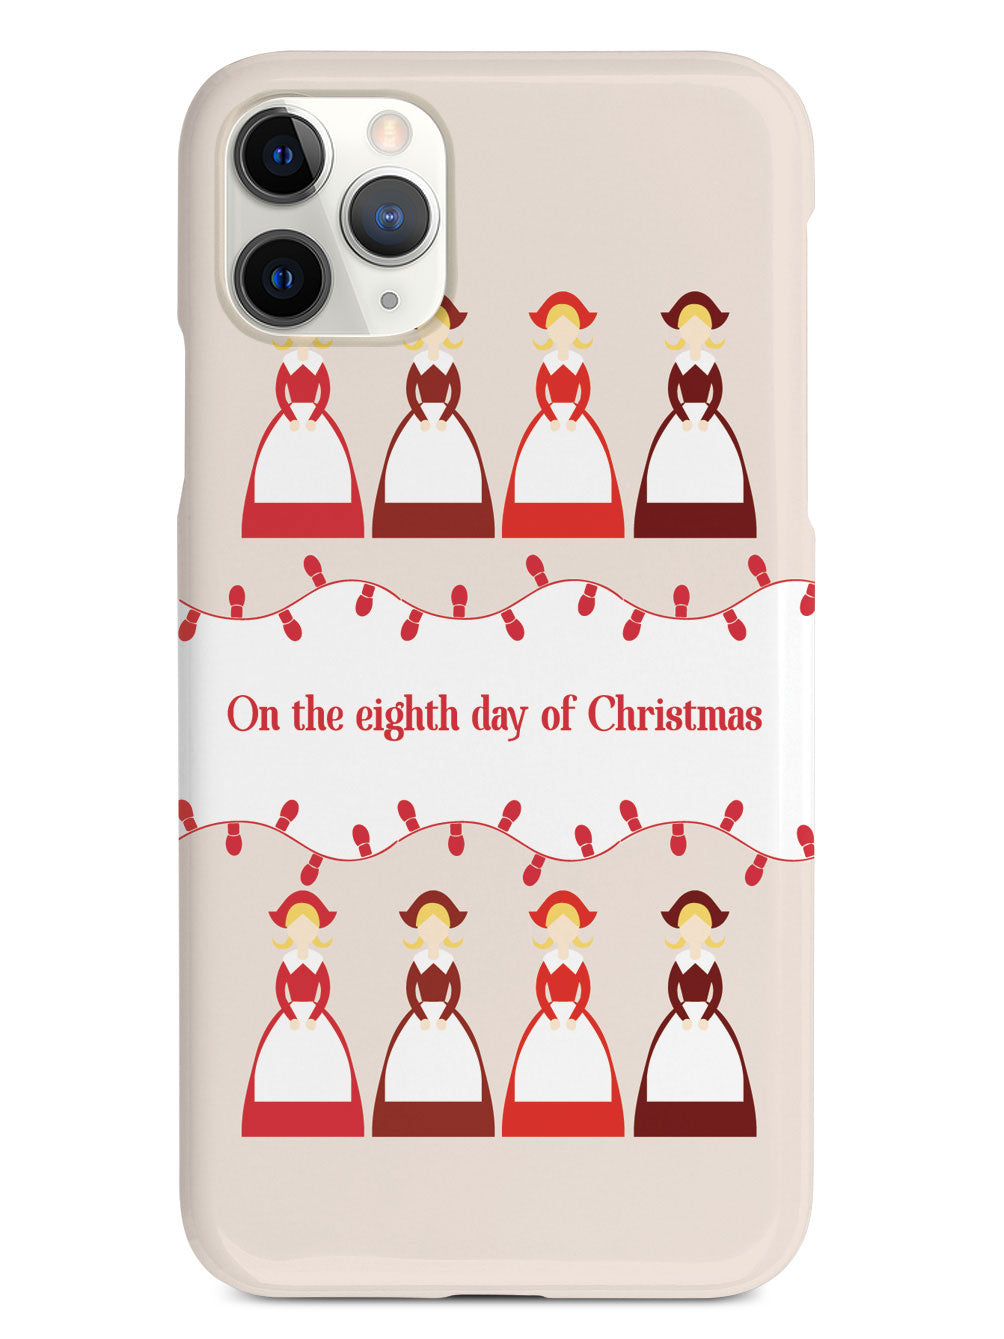 On the Eighth Day of Christmas - 8 Maids a Milking  Case